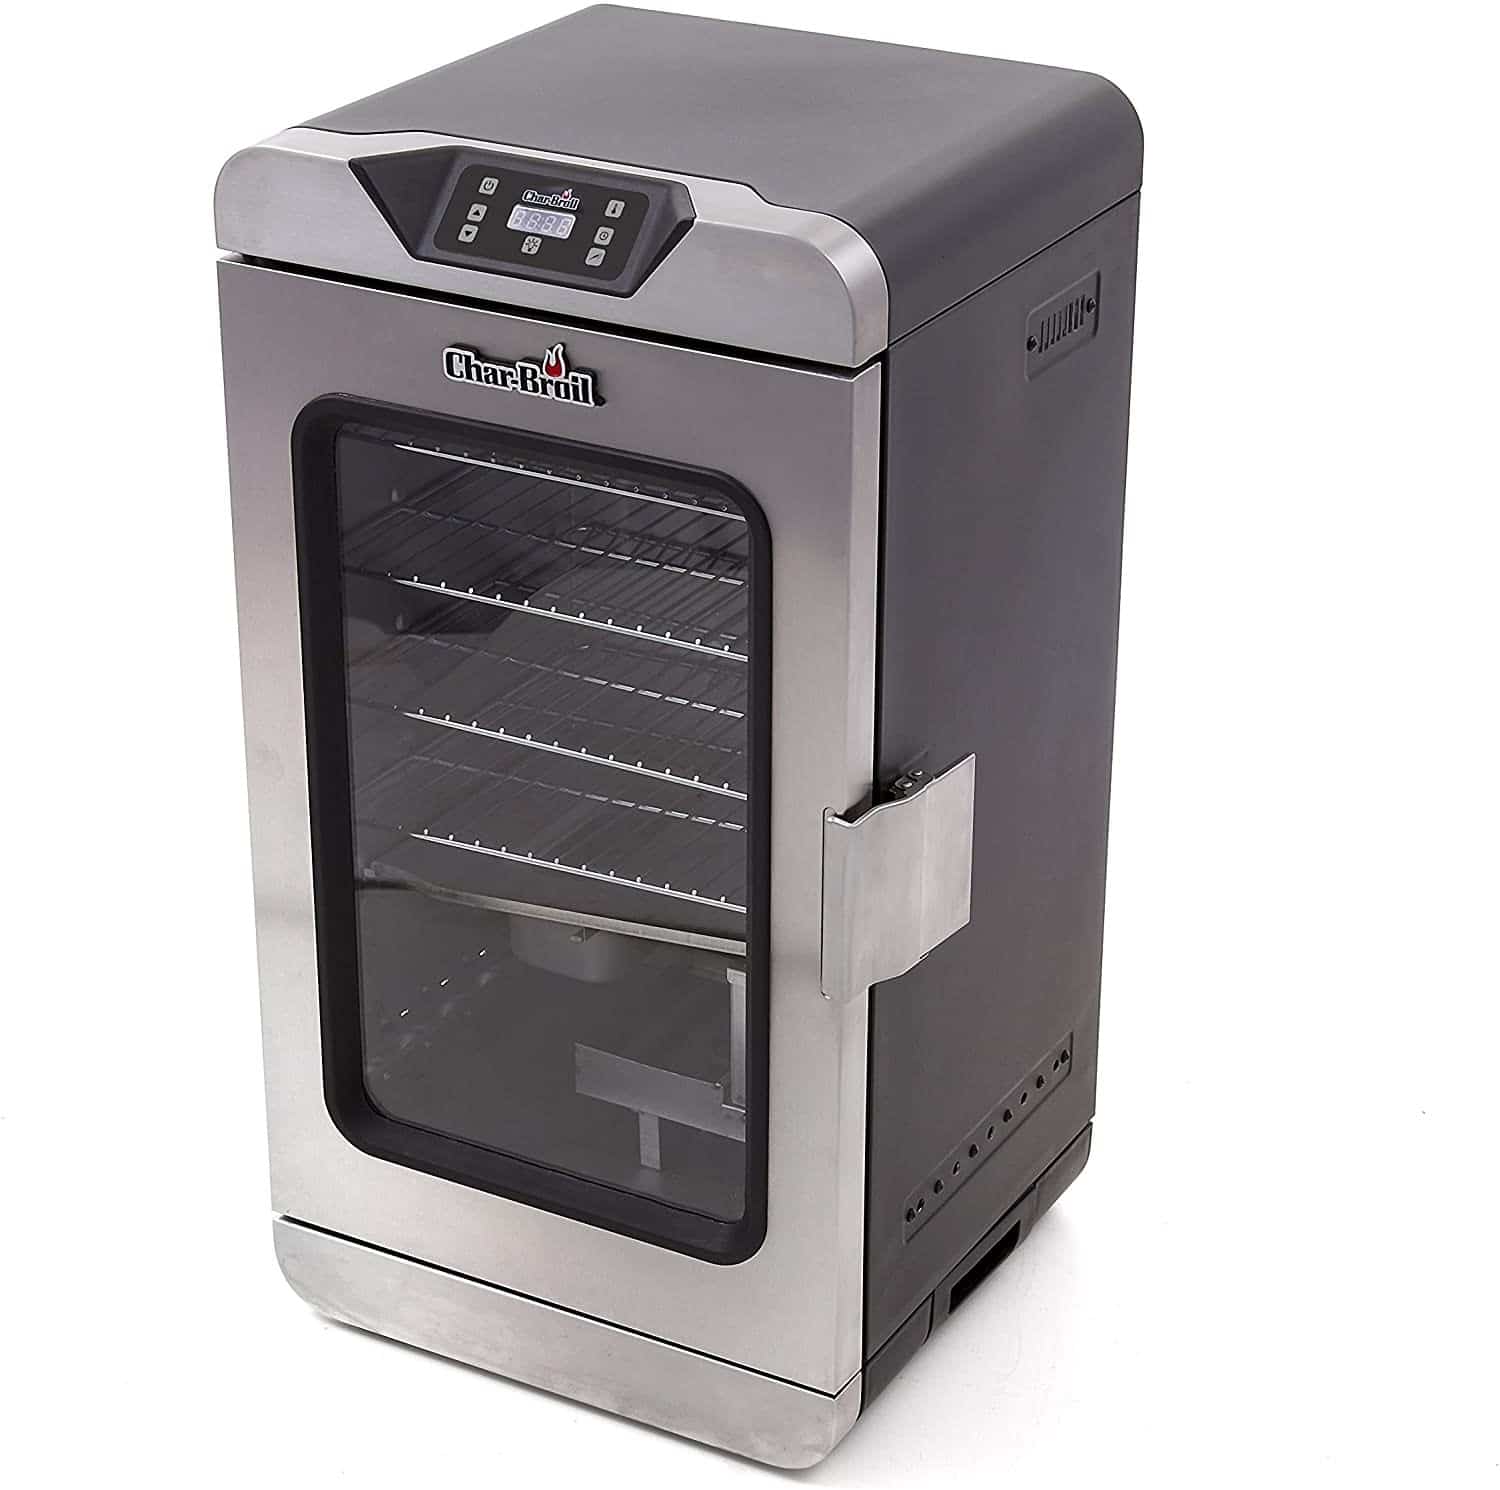 Char-Broil Digital Electric Smoker 725 Deluxe